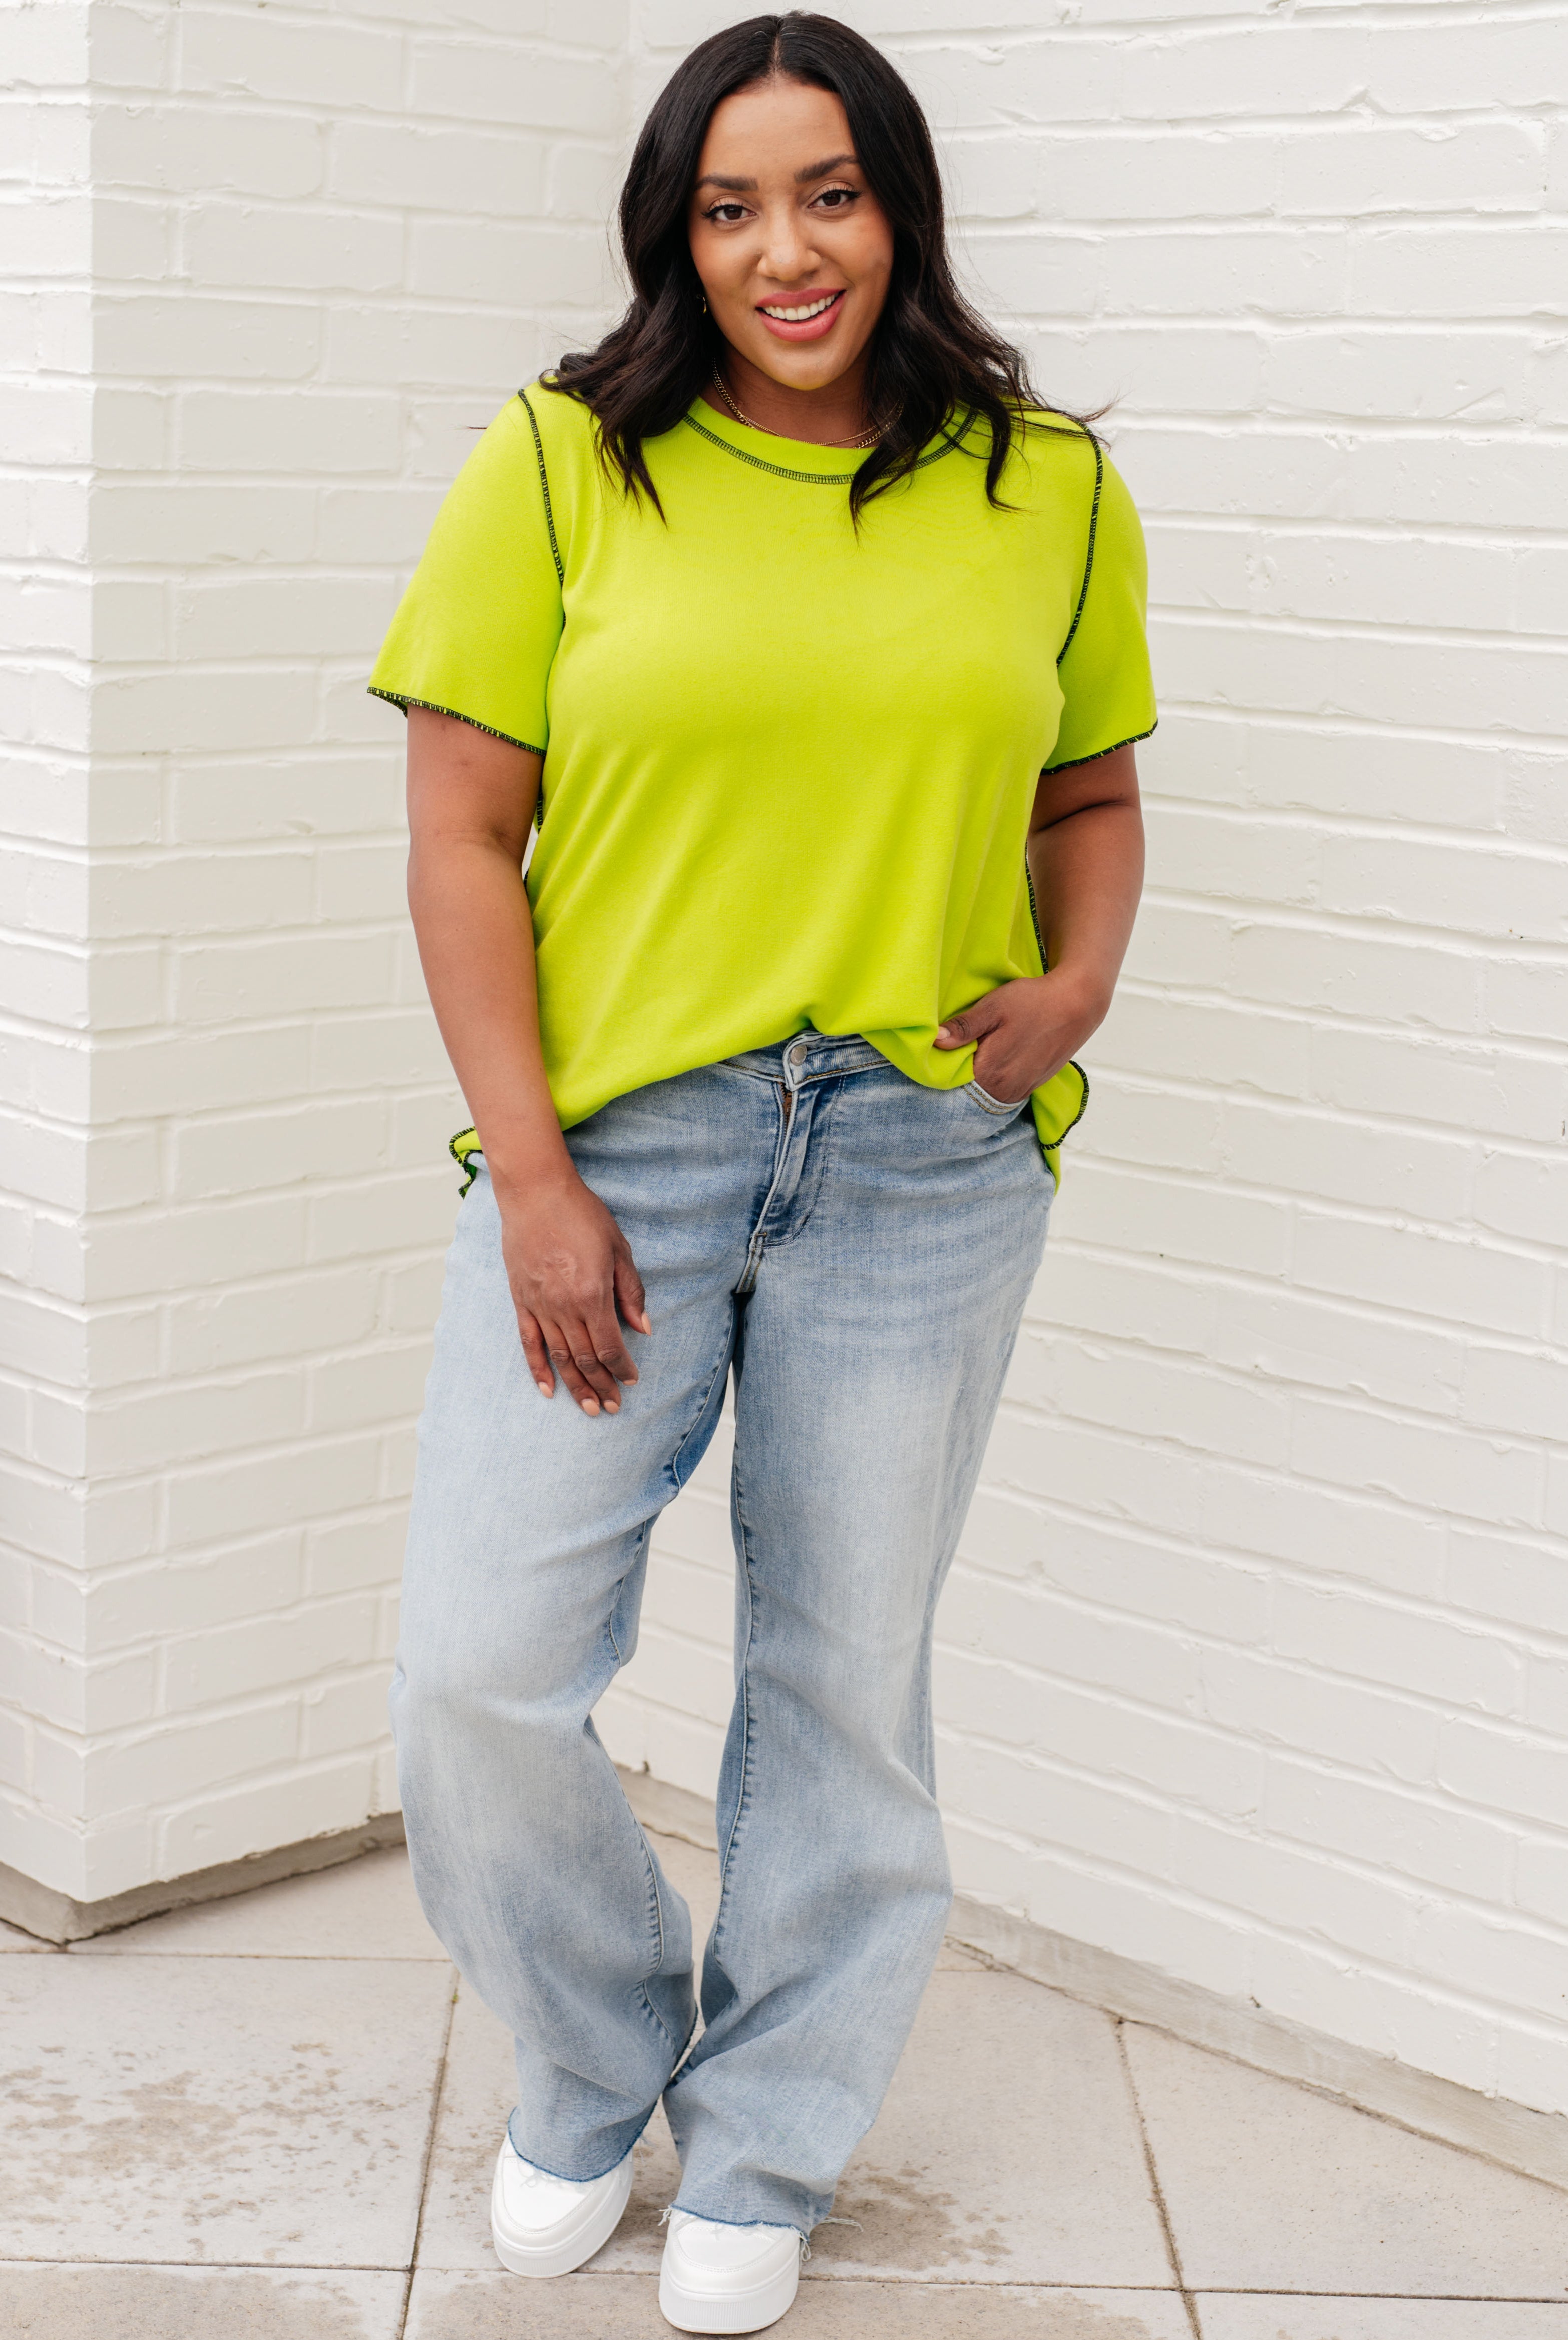 Lemons and Limes Contrast Top-Short Sleeves-Ave Shops-Urban Threadz Boutique, Women's Fashion Boutique in Saugatuck, MI